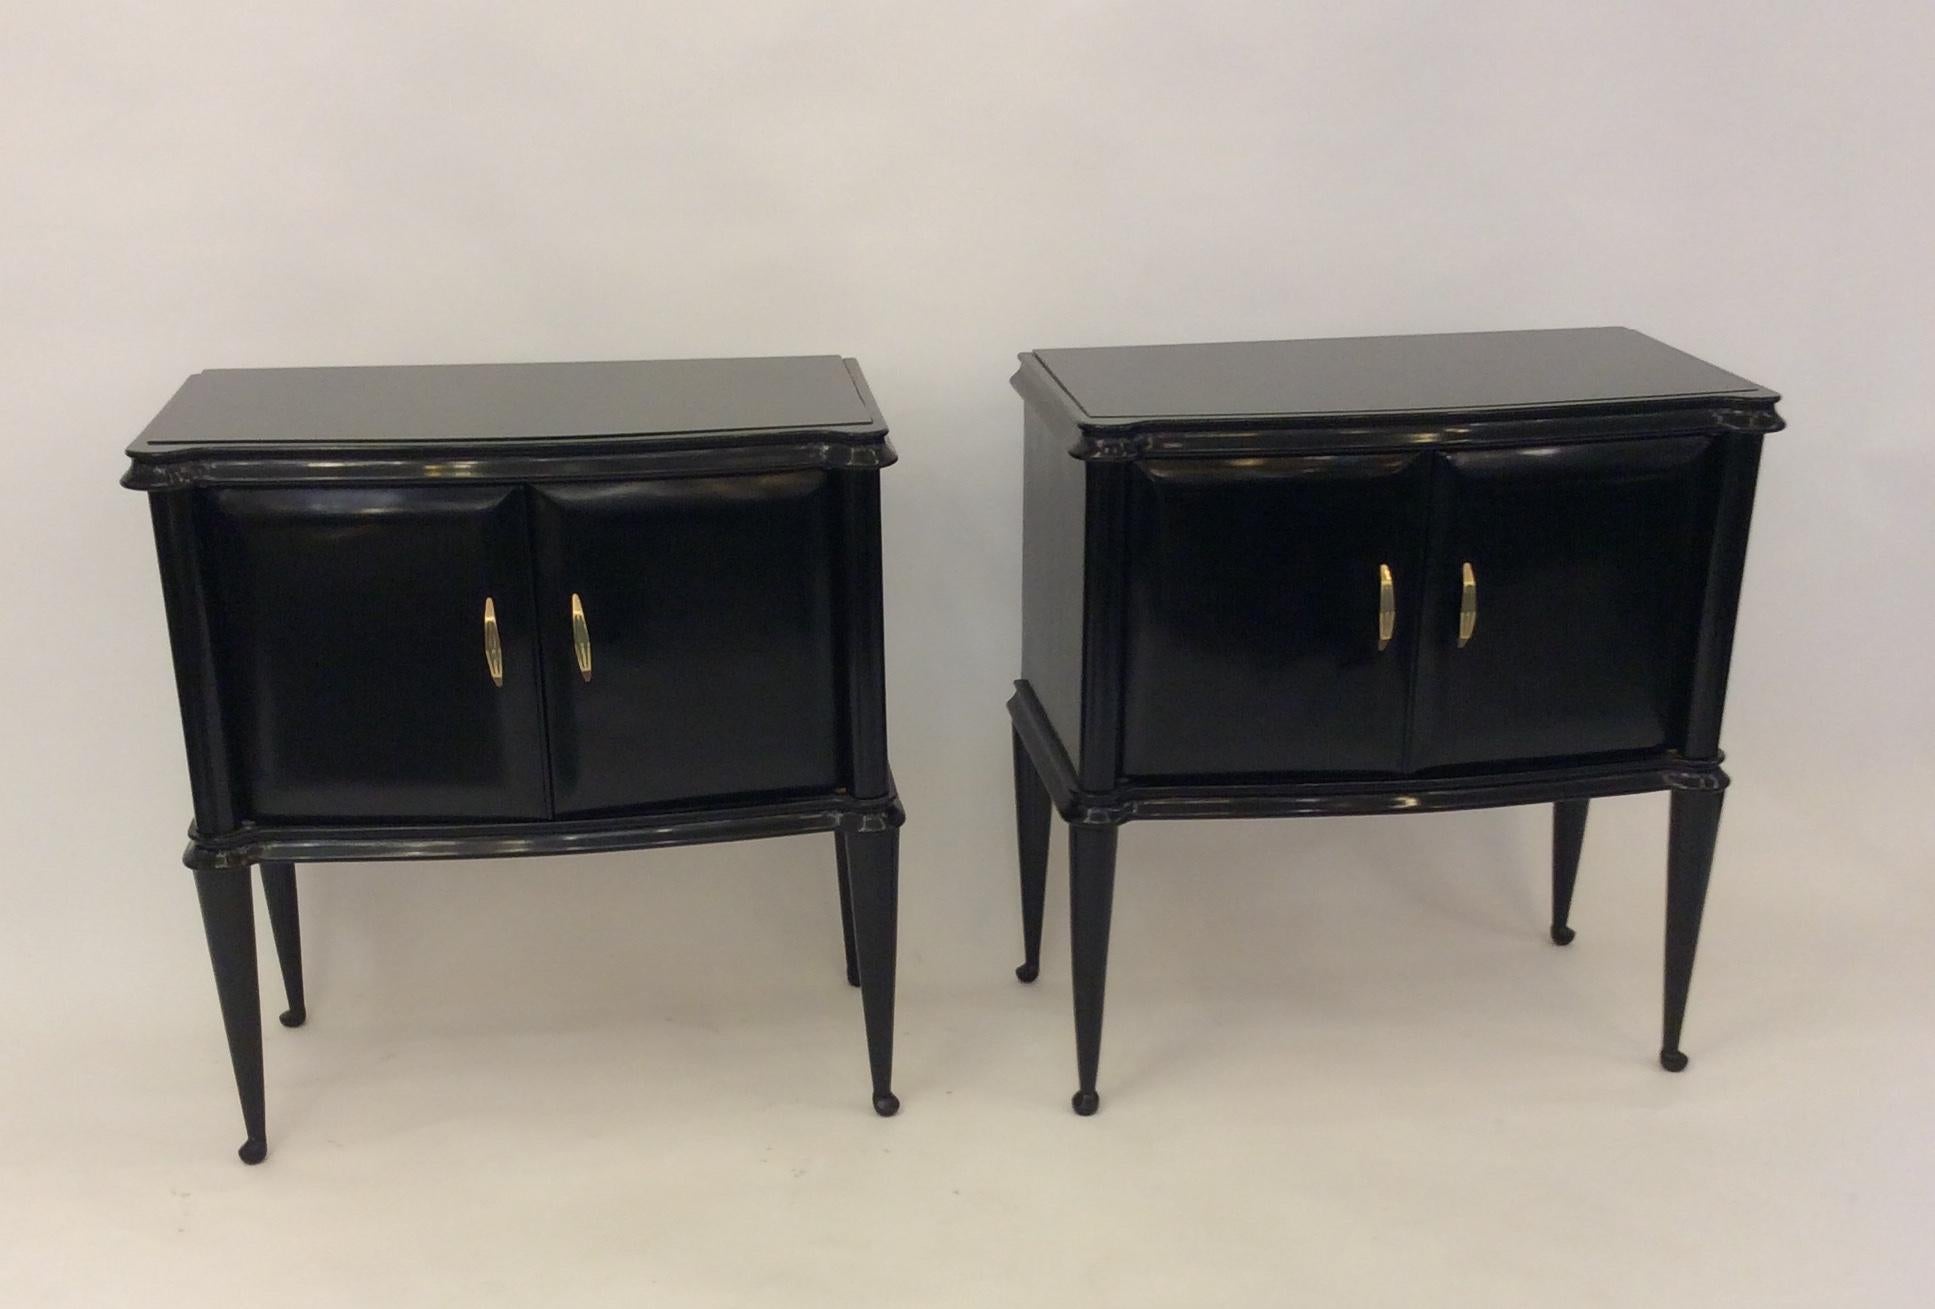 Pair of nightstands/ side tables in ebonized wood with brass hardware and black glass top.